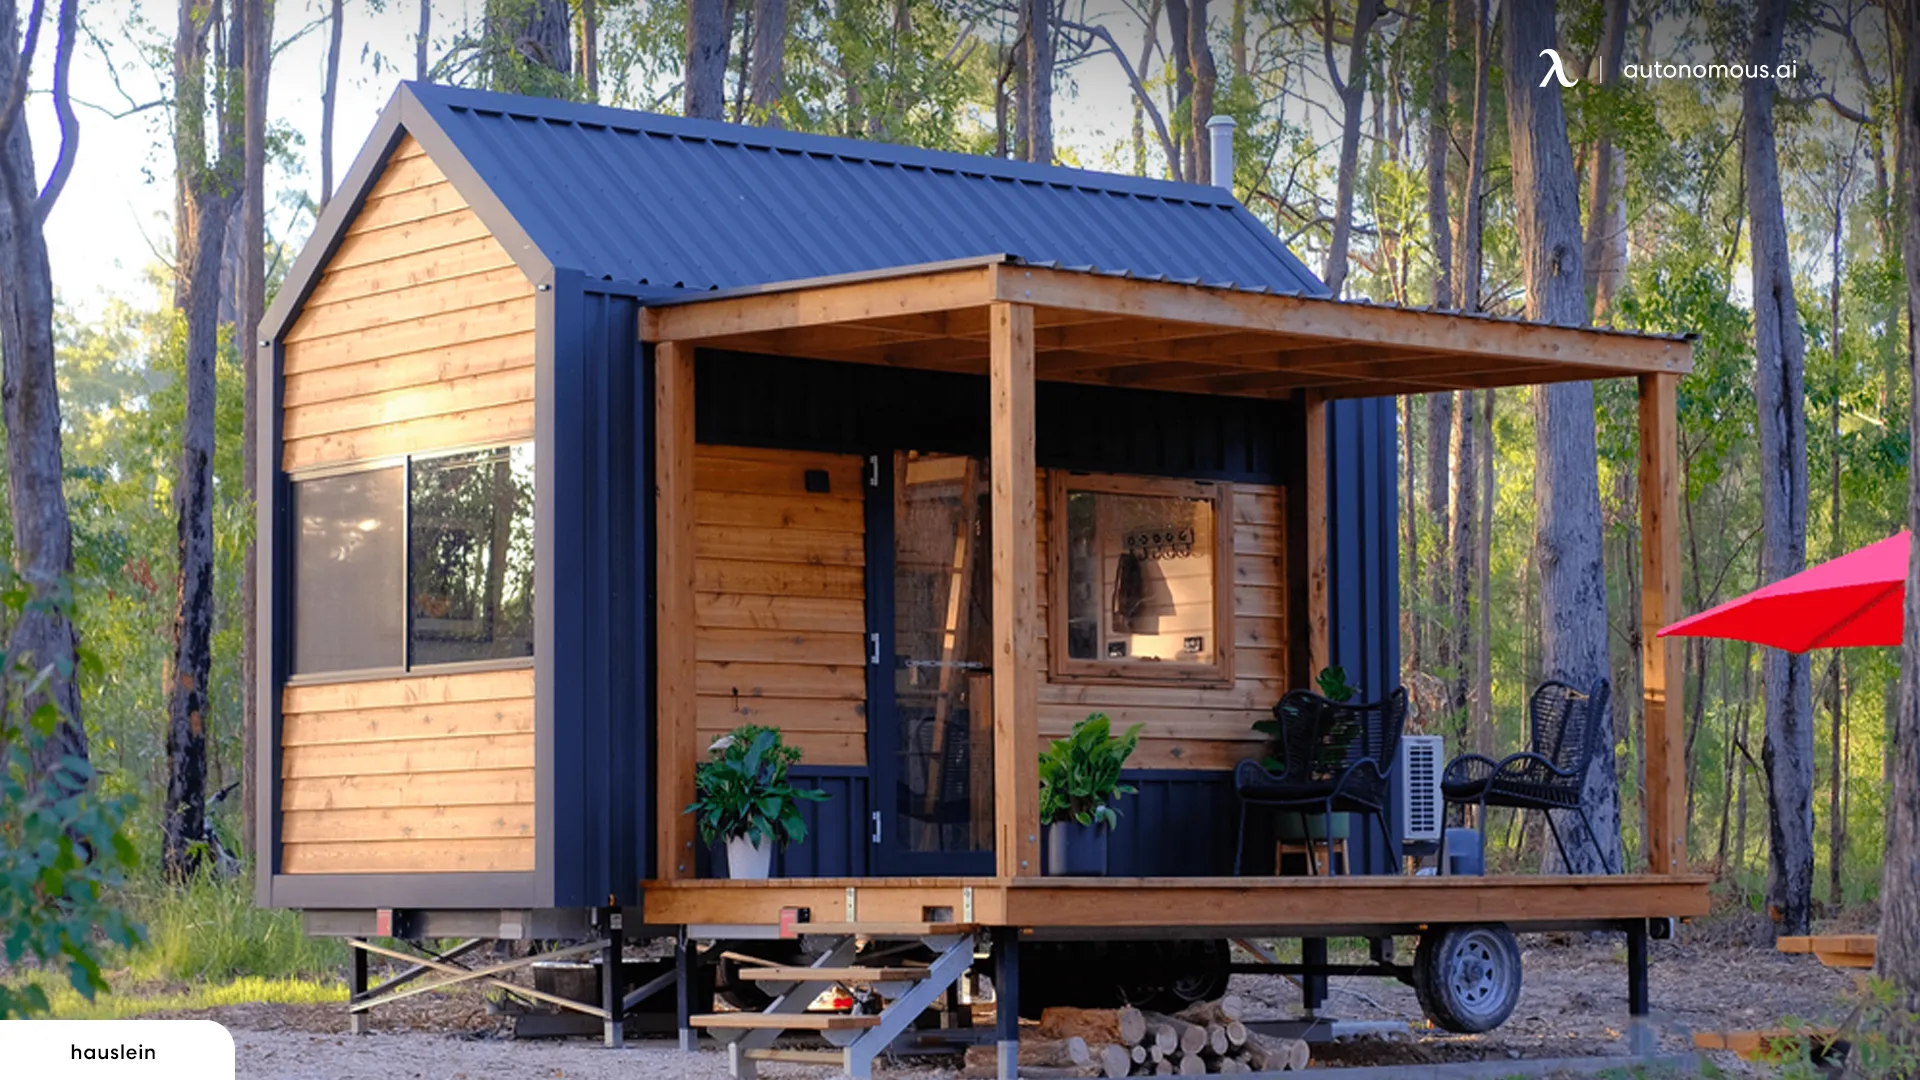 What is a Tiny House?